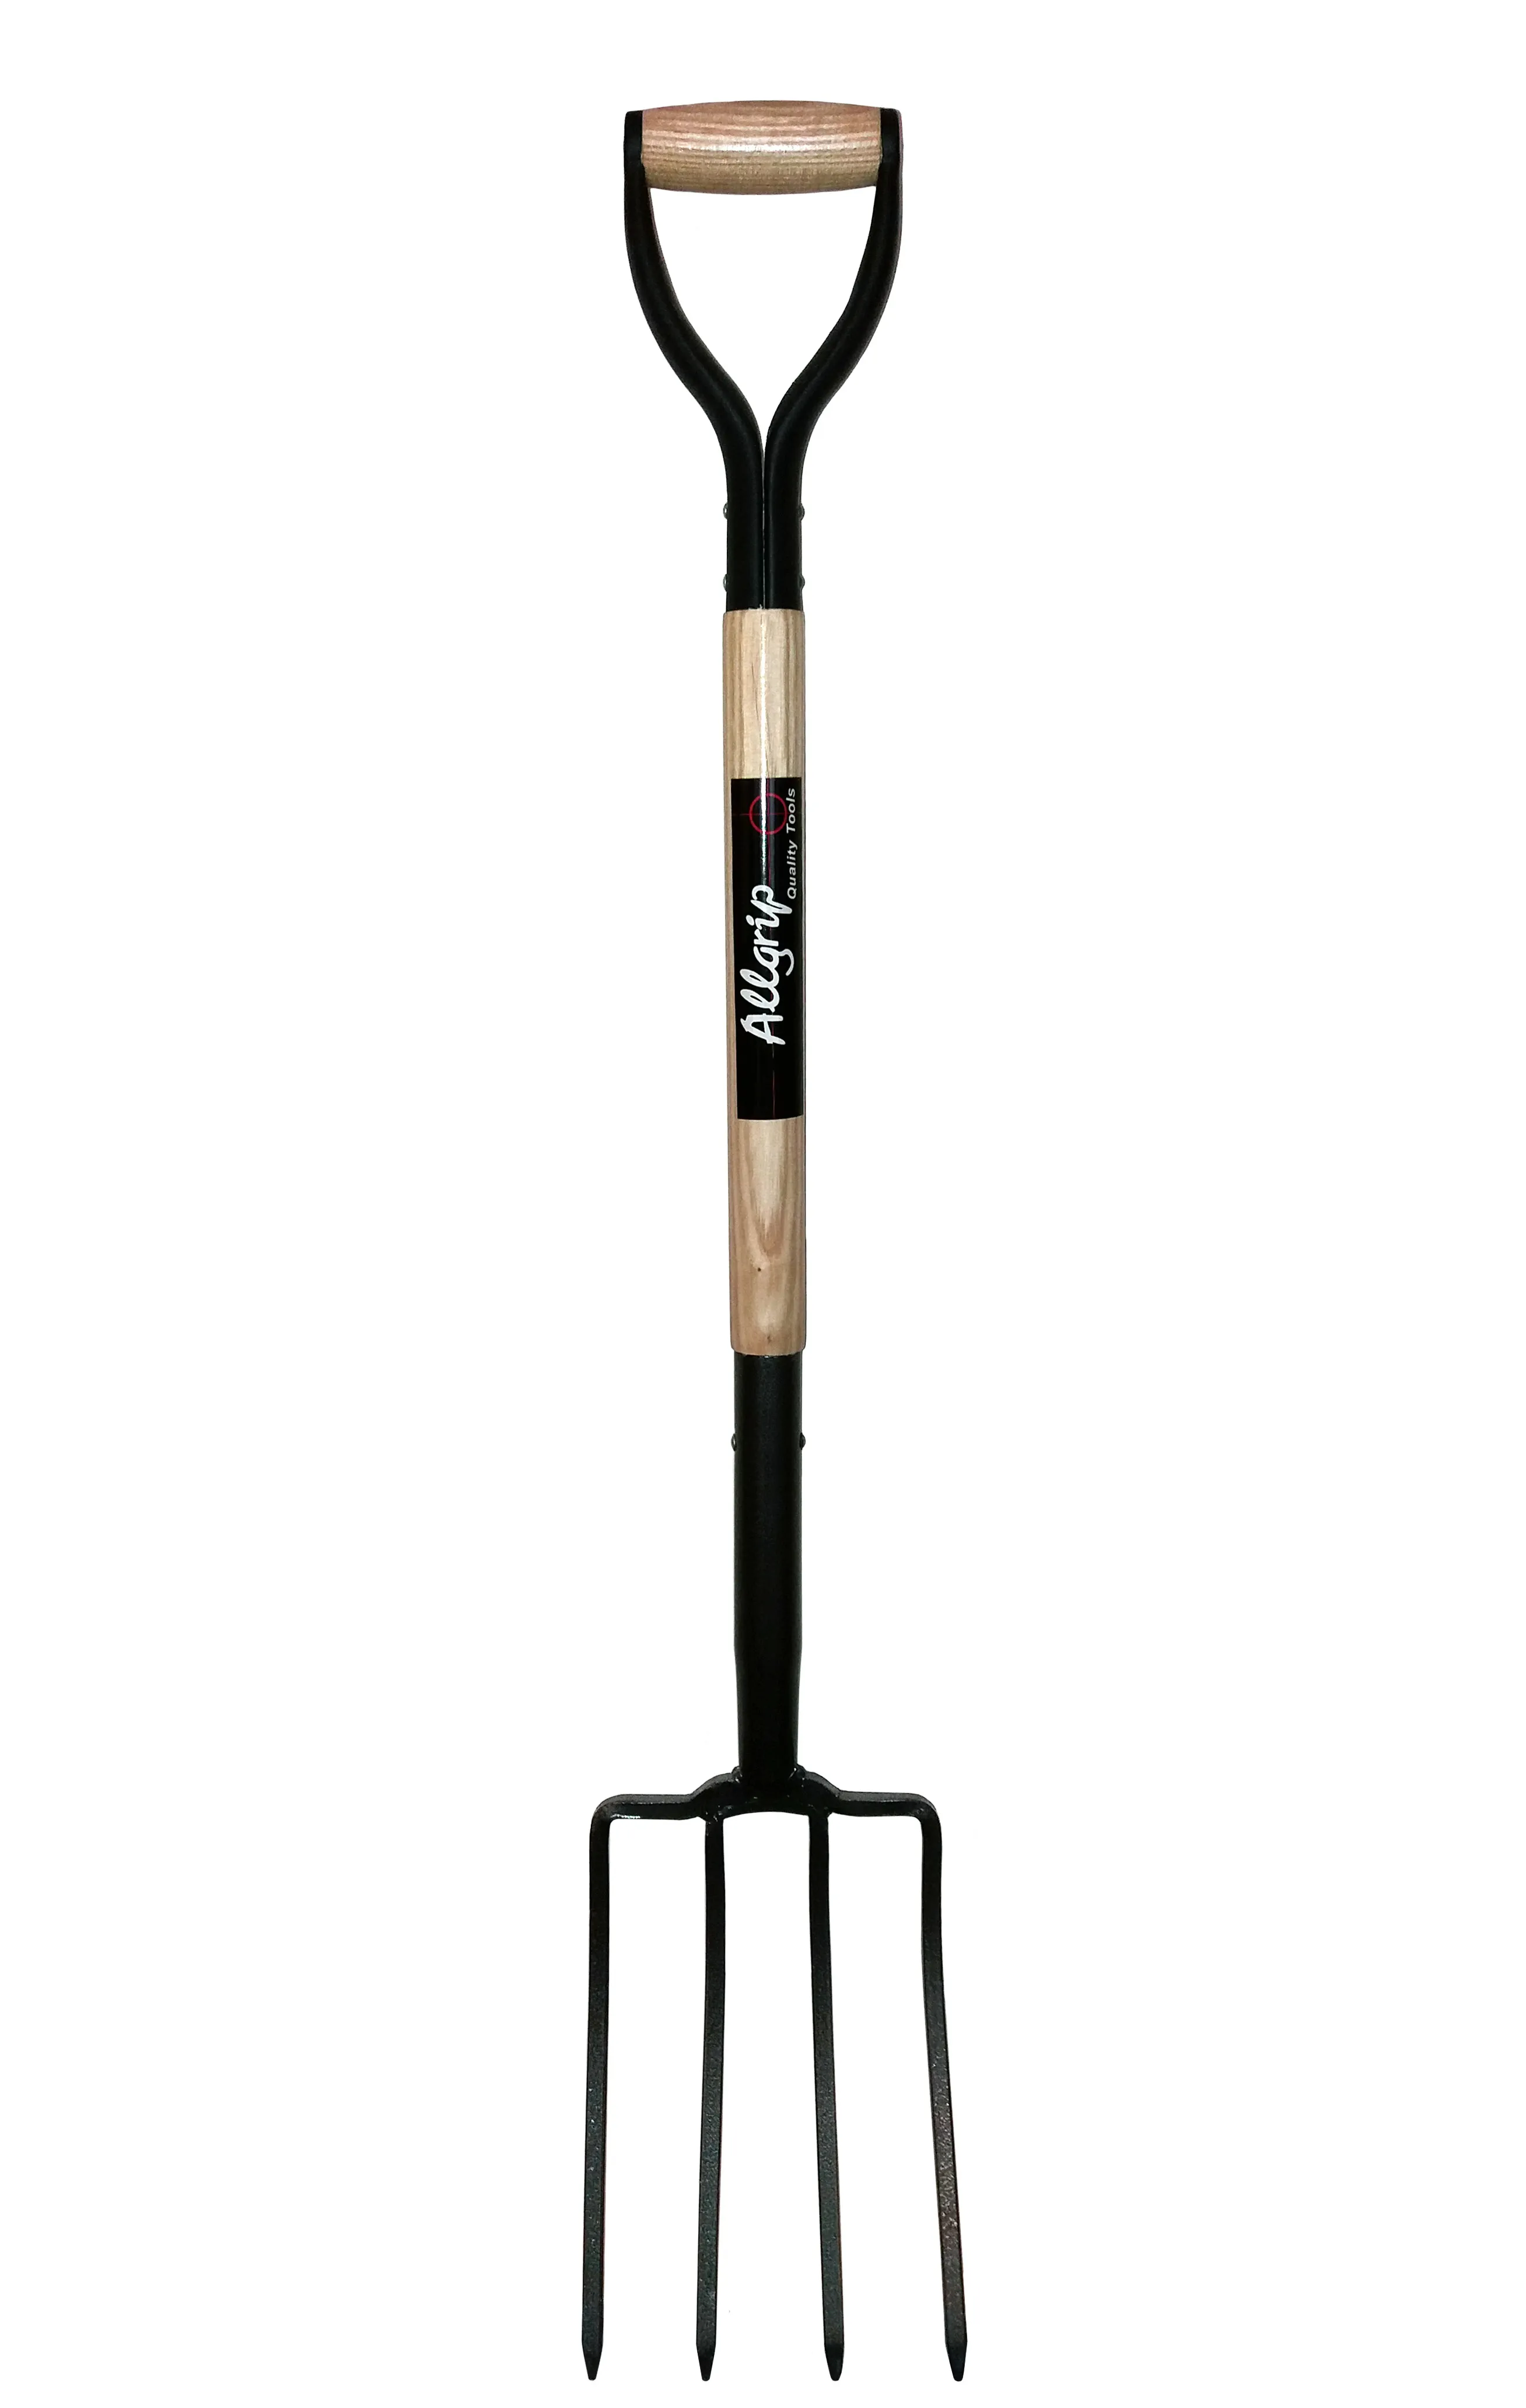 Allgrip - Digging Pitch Fork with D-Handle 